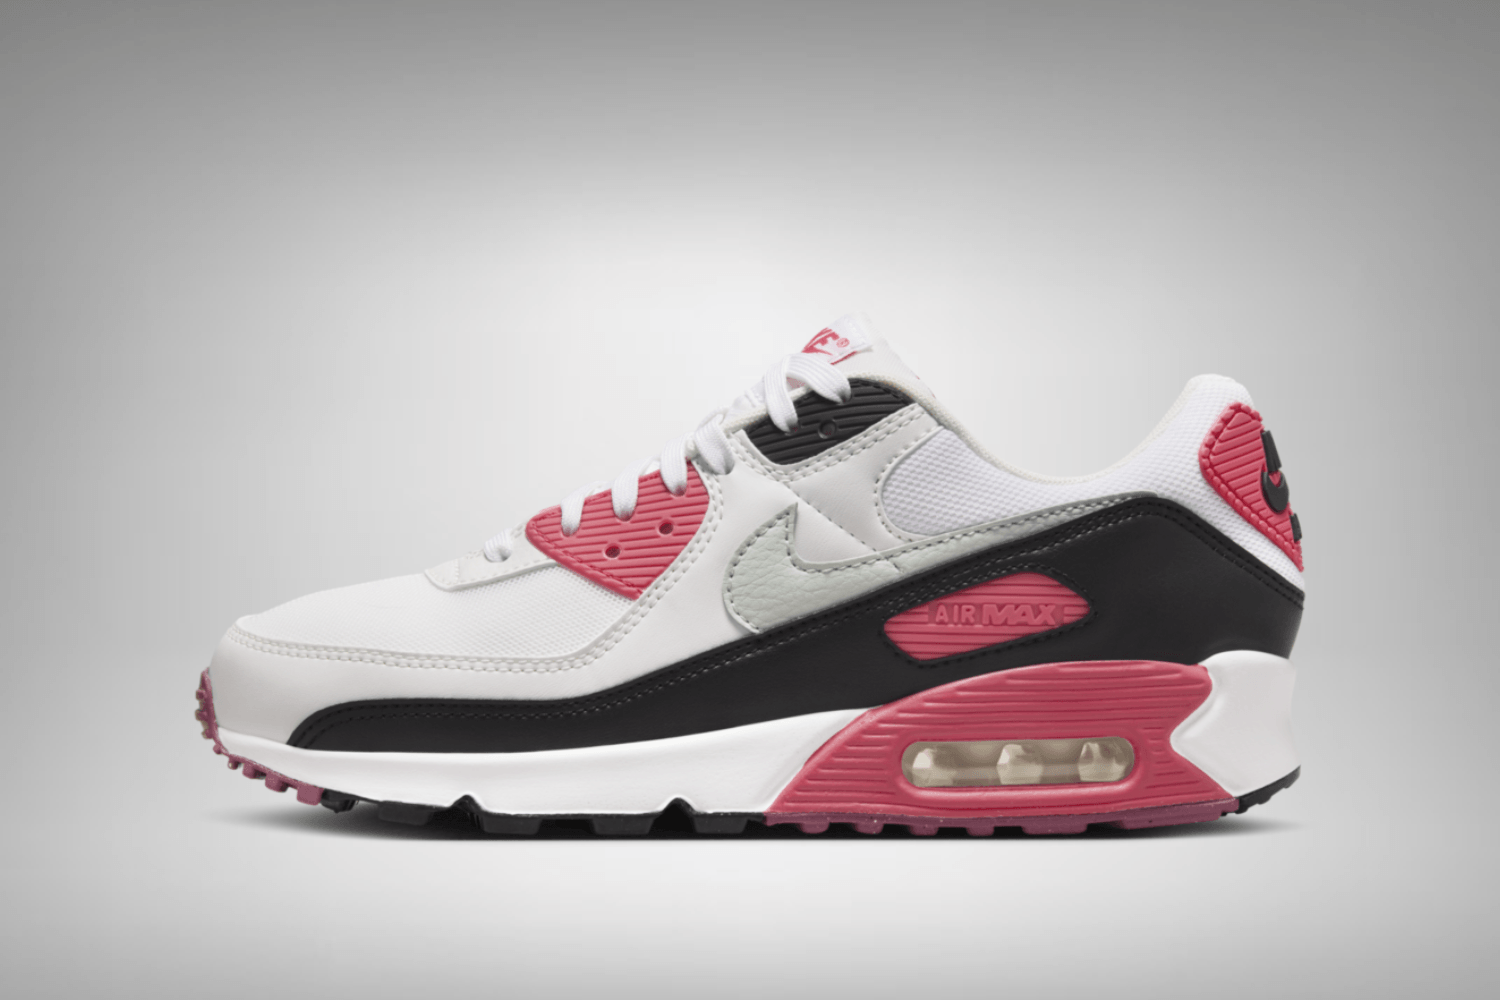 The Nike Air Max 90 'Aster Pink' is inspired by the OG 'Infrared' colorway